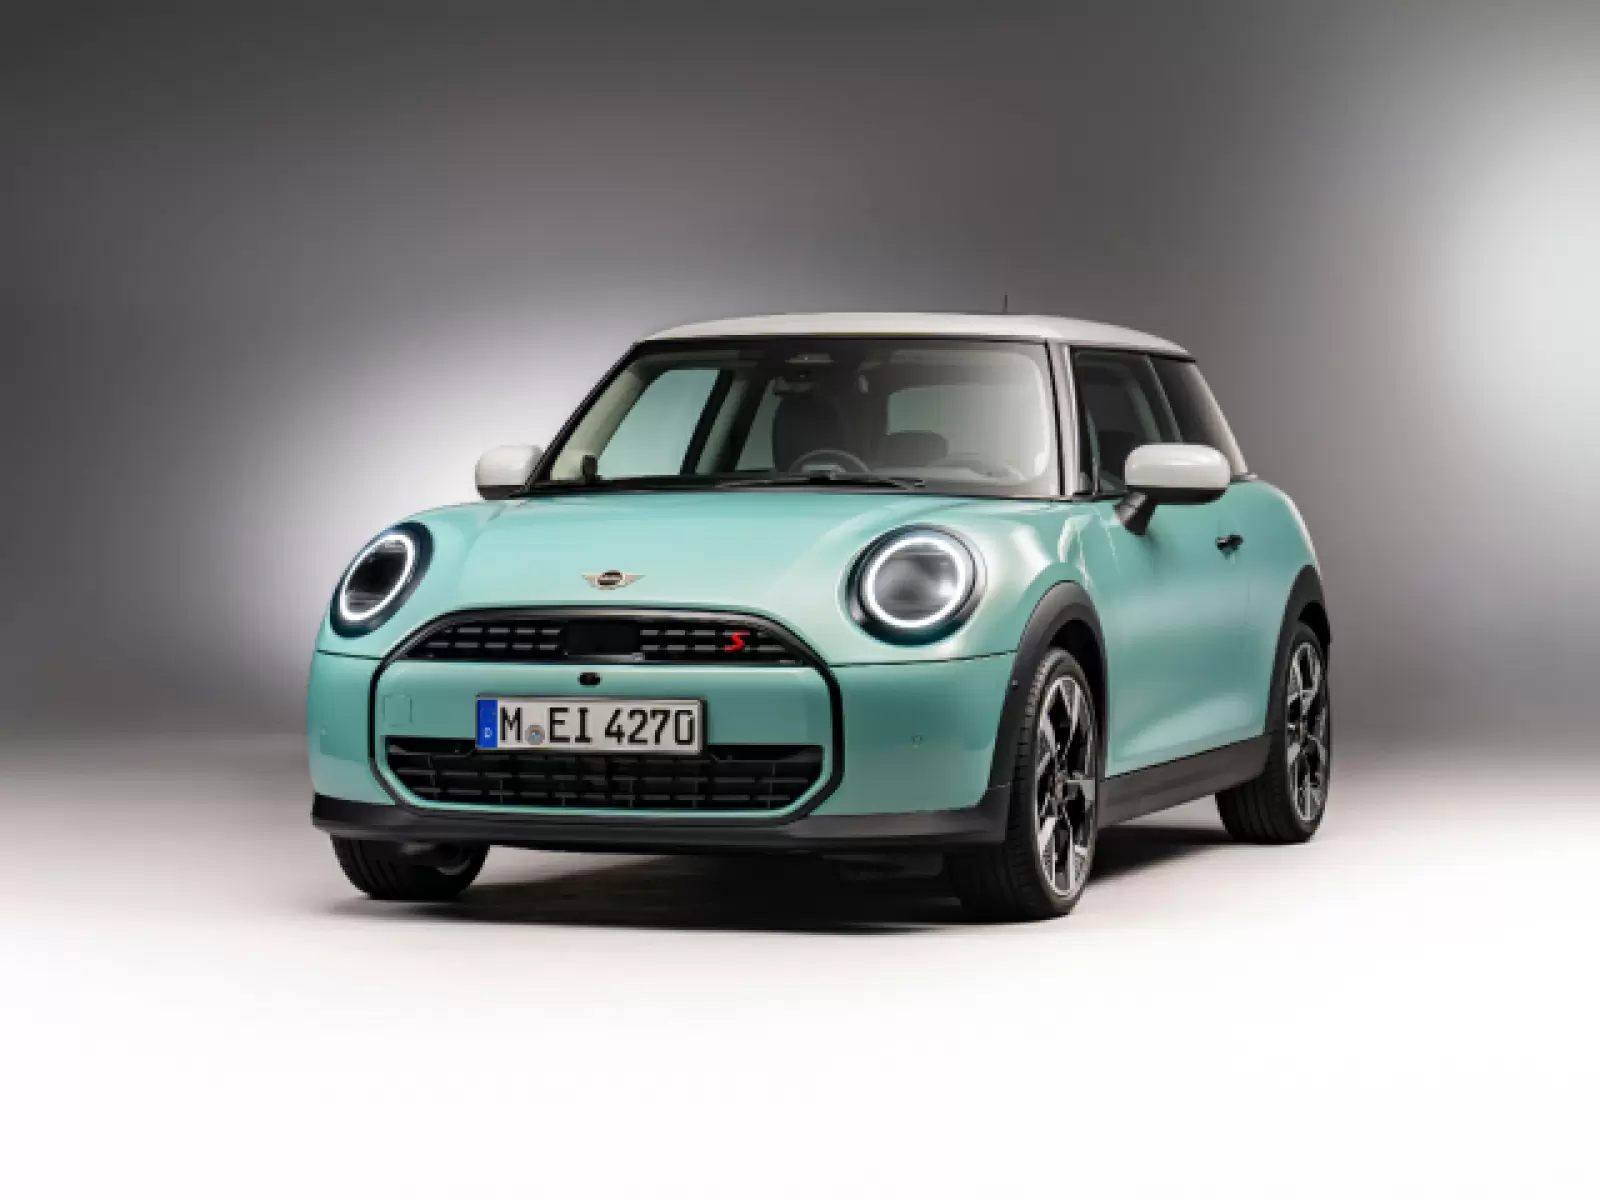 Fourth Gen Mini Cooper enters the global market, know how the brand's last ICE model is